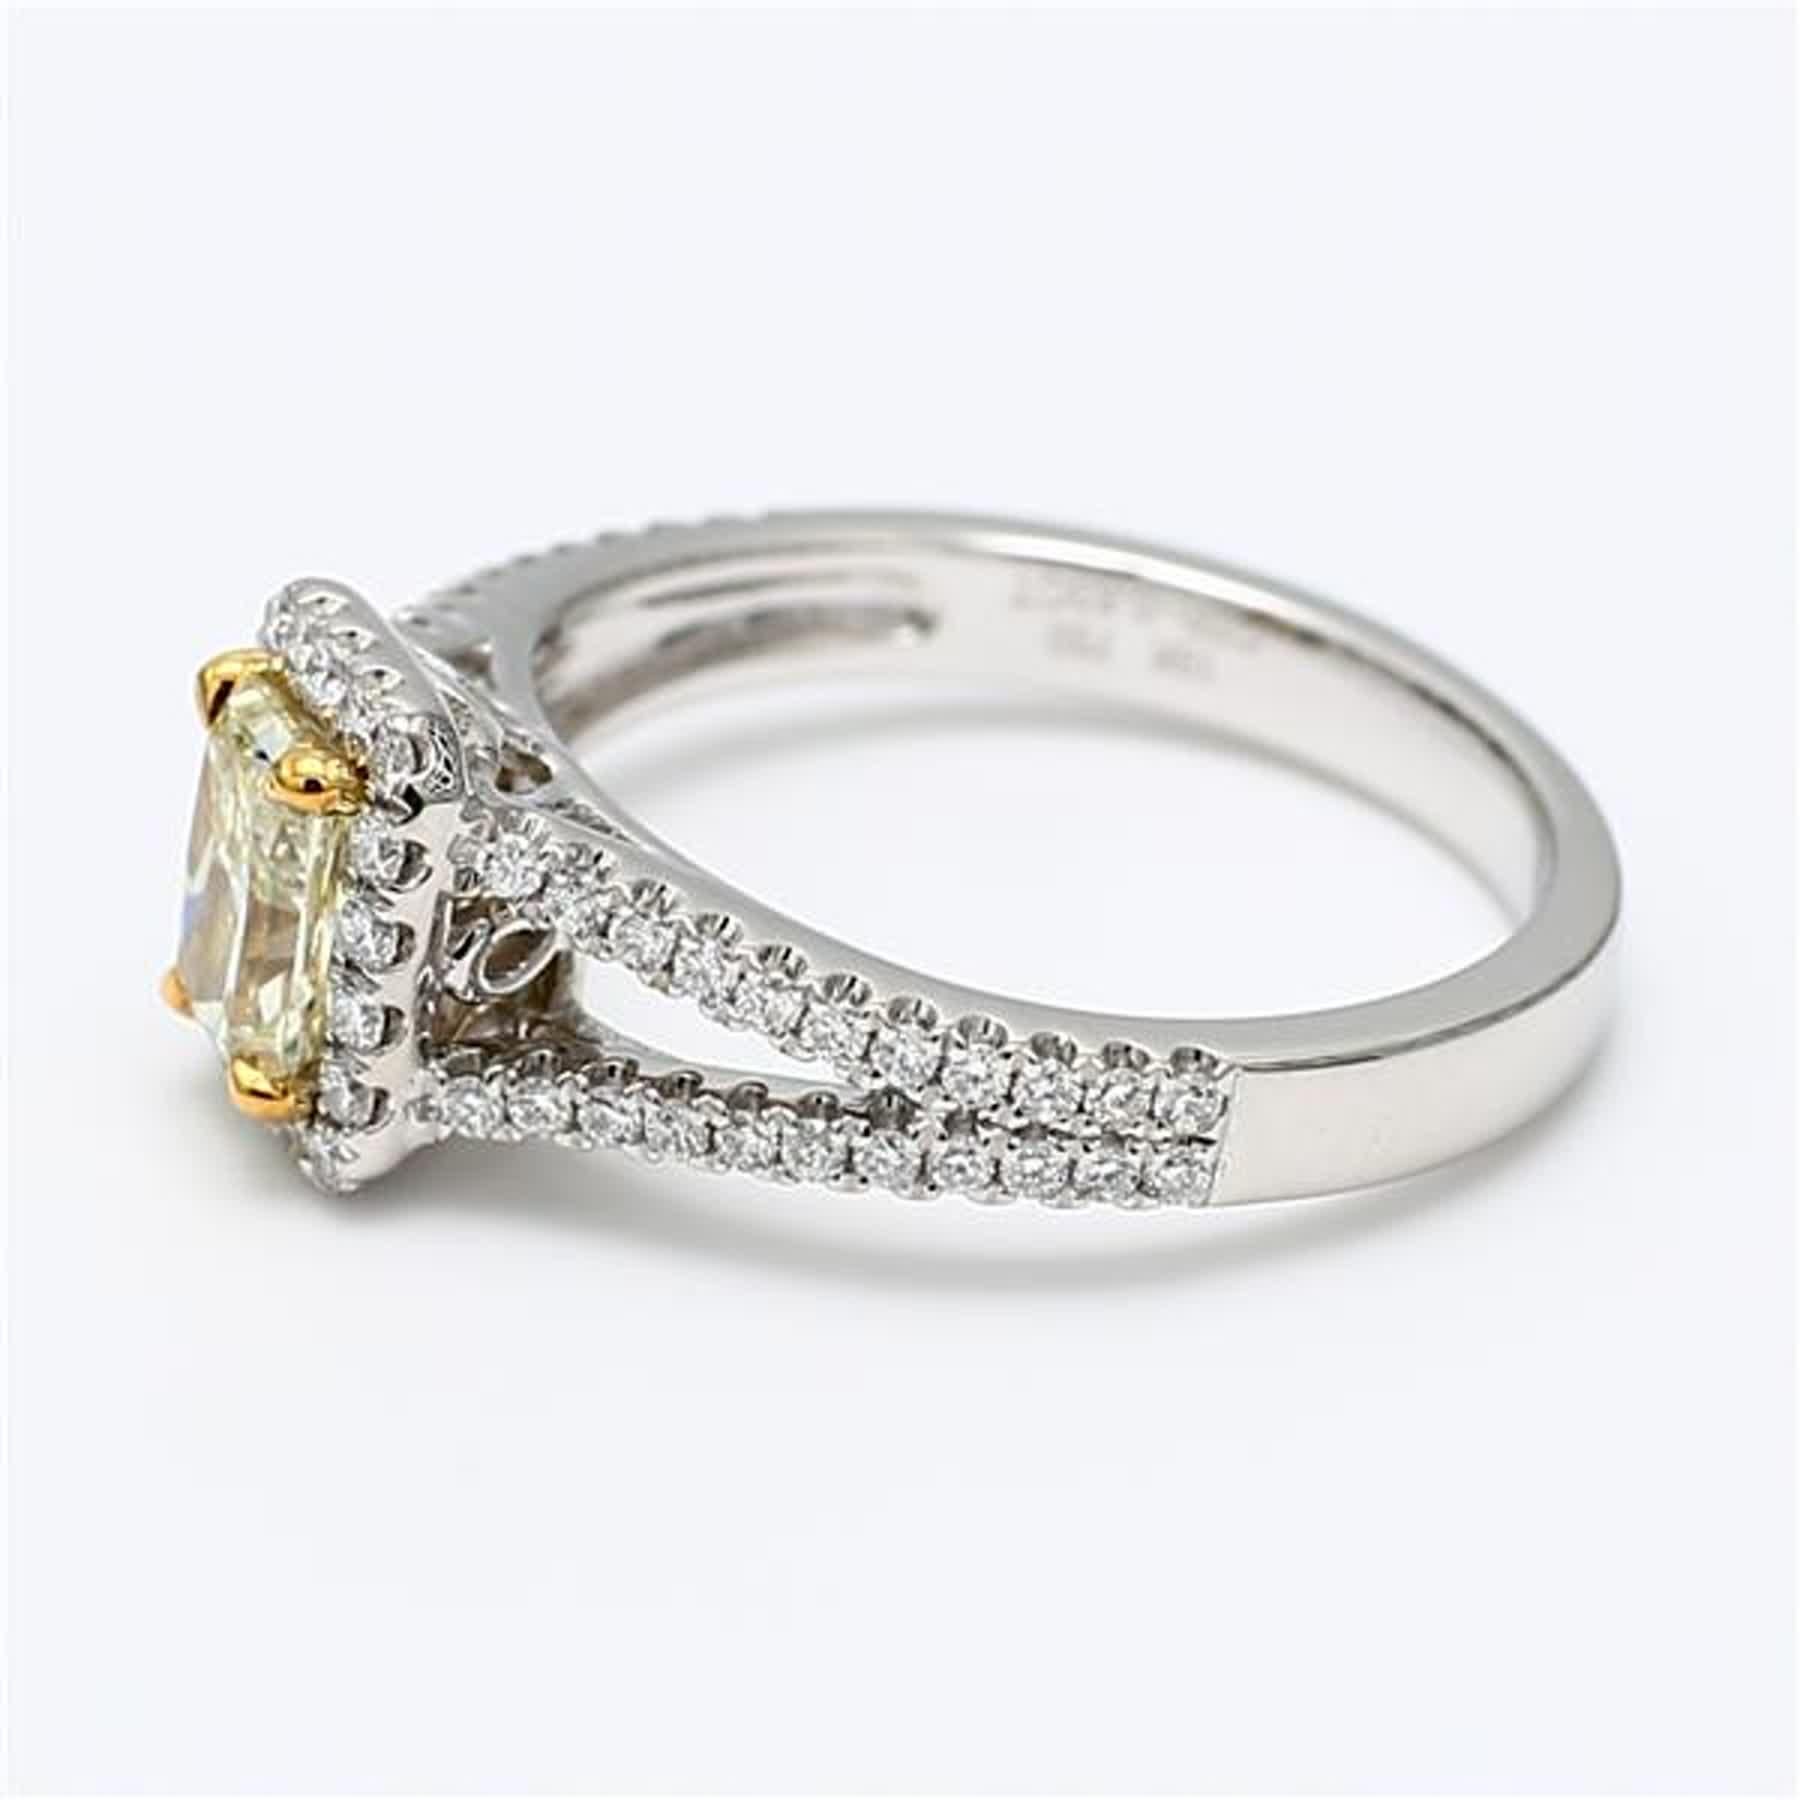 Contemporary GIA Certified Natural Yellow Radiant and White Diamond 1.22 Carat TW Plat Ring